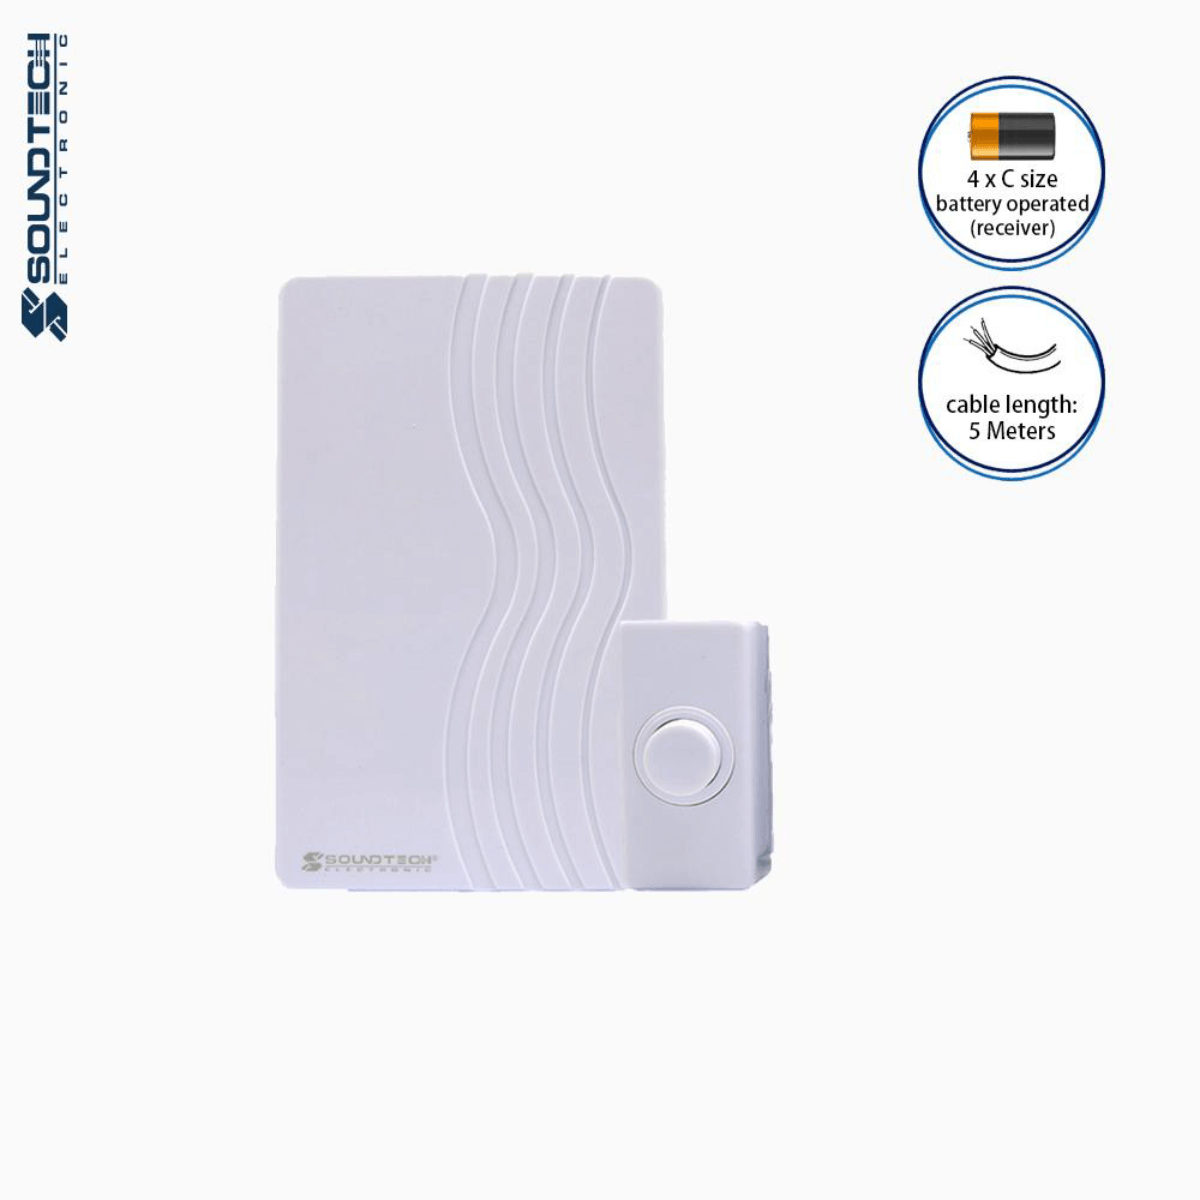 Soundteoh Mechanical Striking Wired Doorbell MDC-861